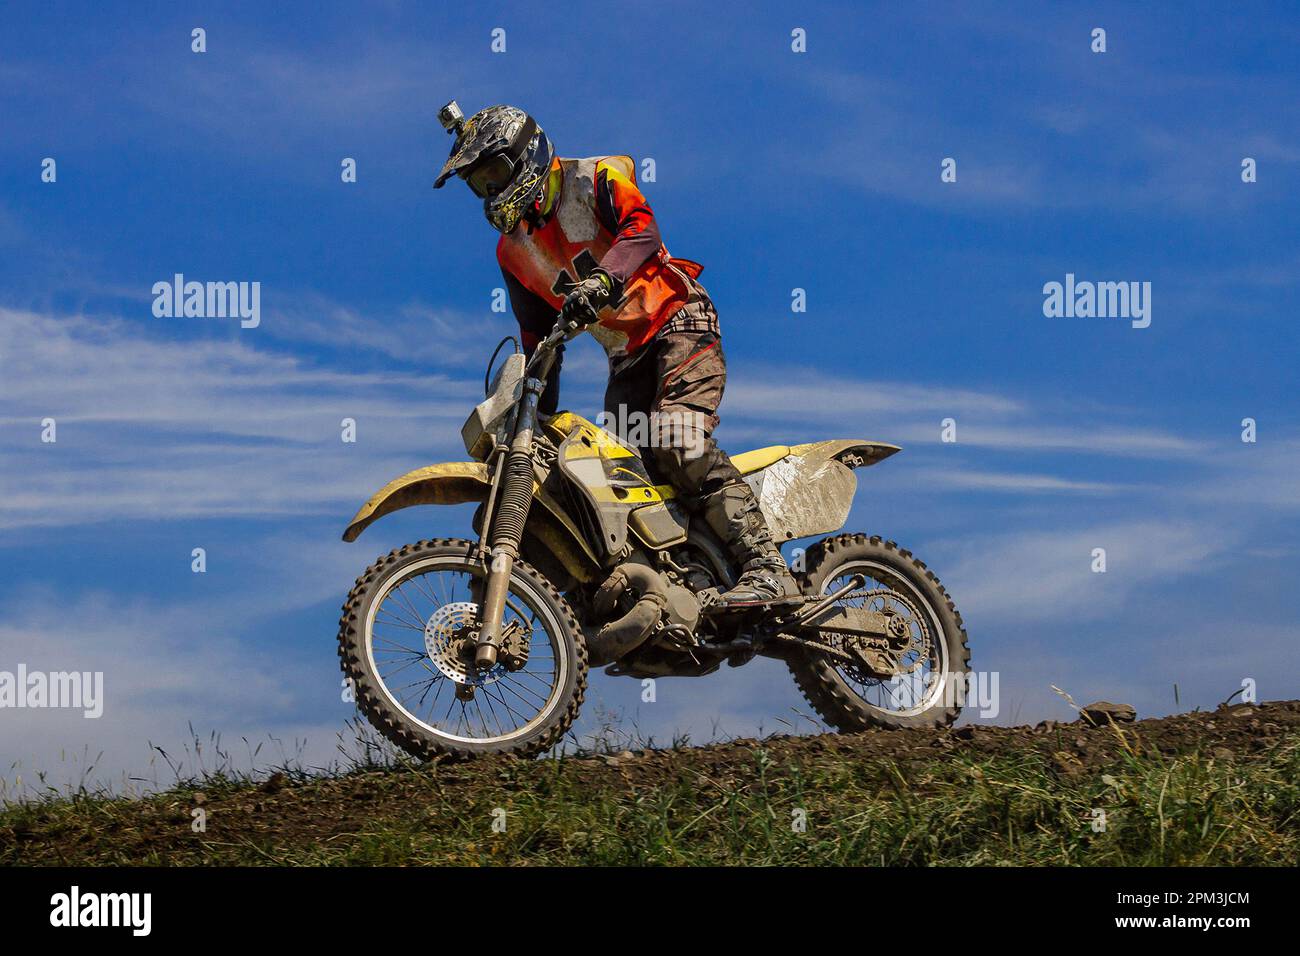 motocross rider riding off-road motorsport racing dusty trail on background blue sky Stock Photo